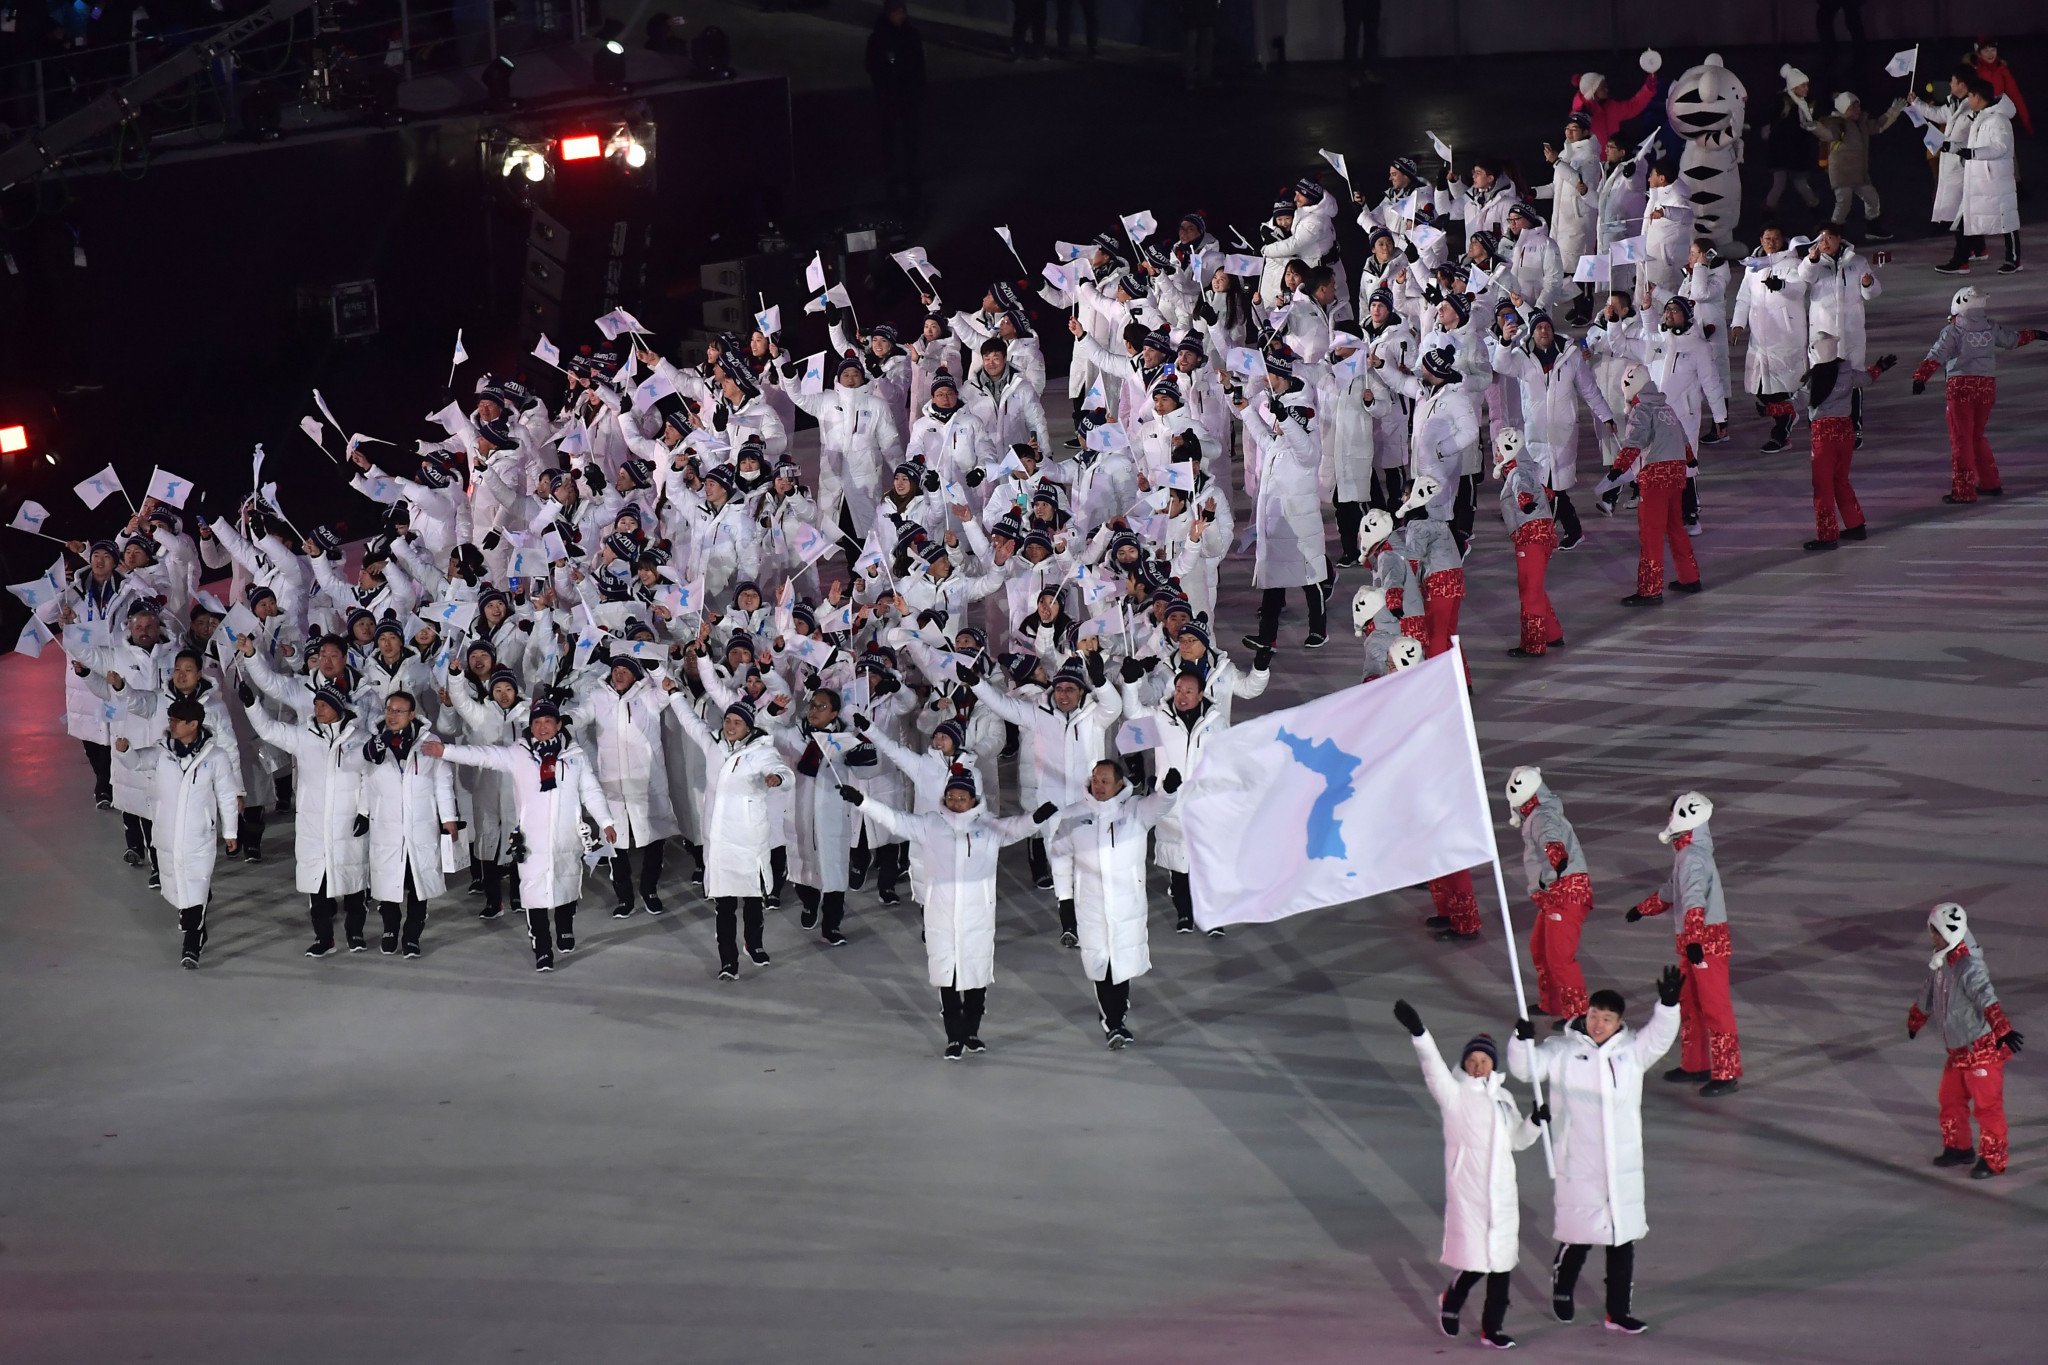 North and South Korean athletes have marched together under a unified flag 10 times before, most recently at the Pyeongchang Winter Olympics earlier this year ©Getty Images